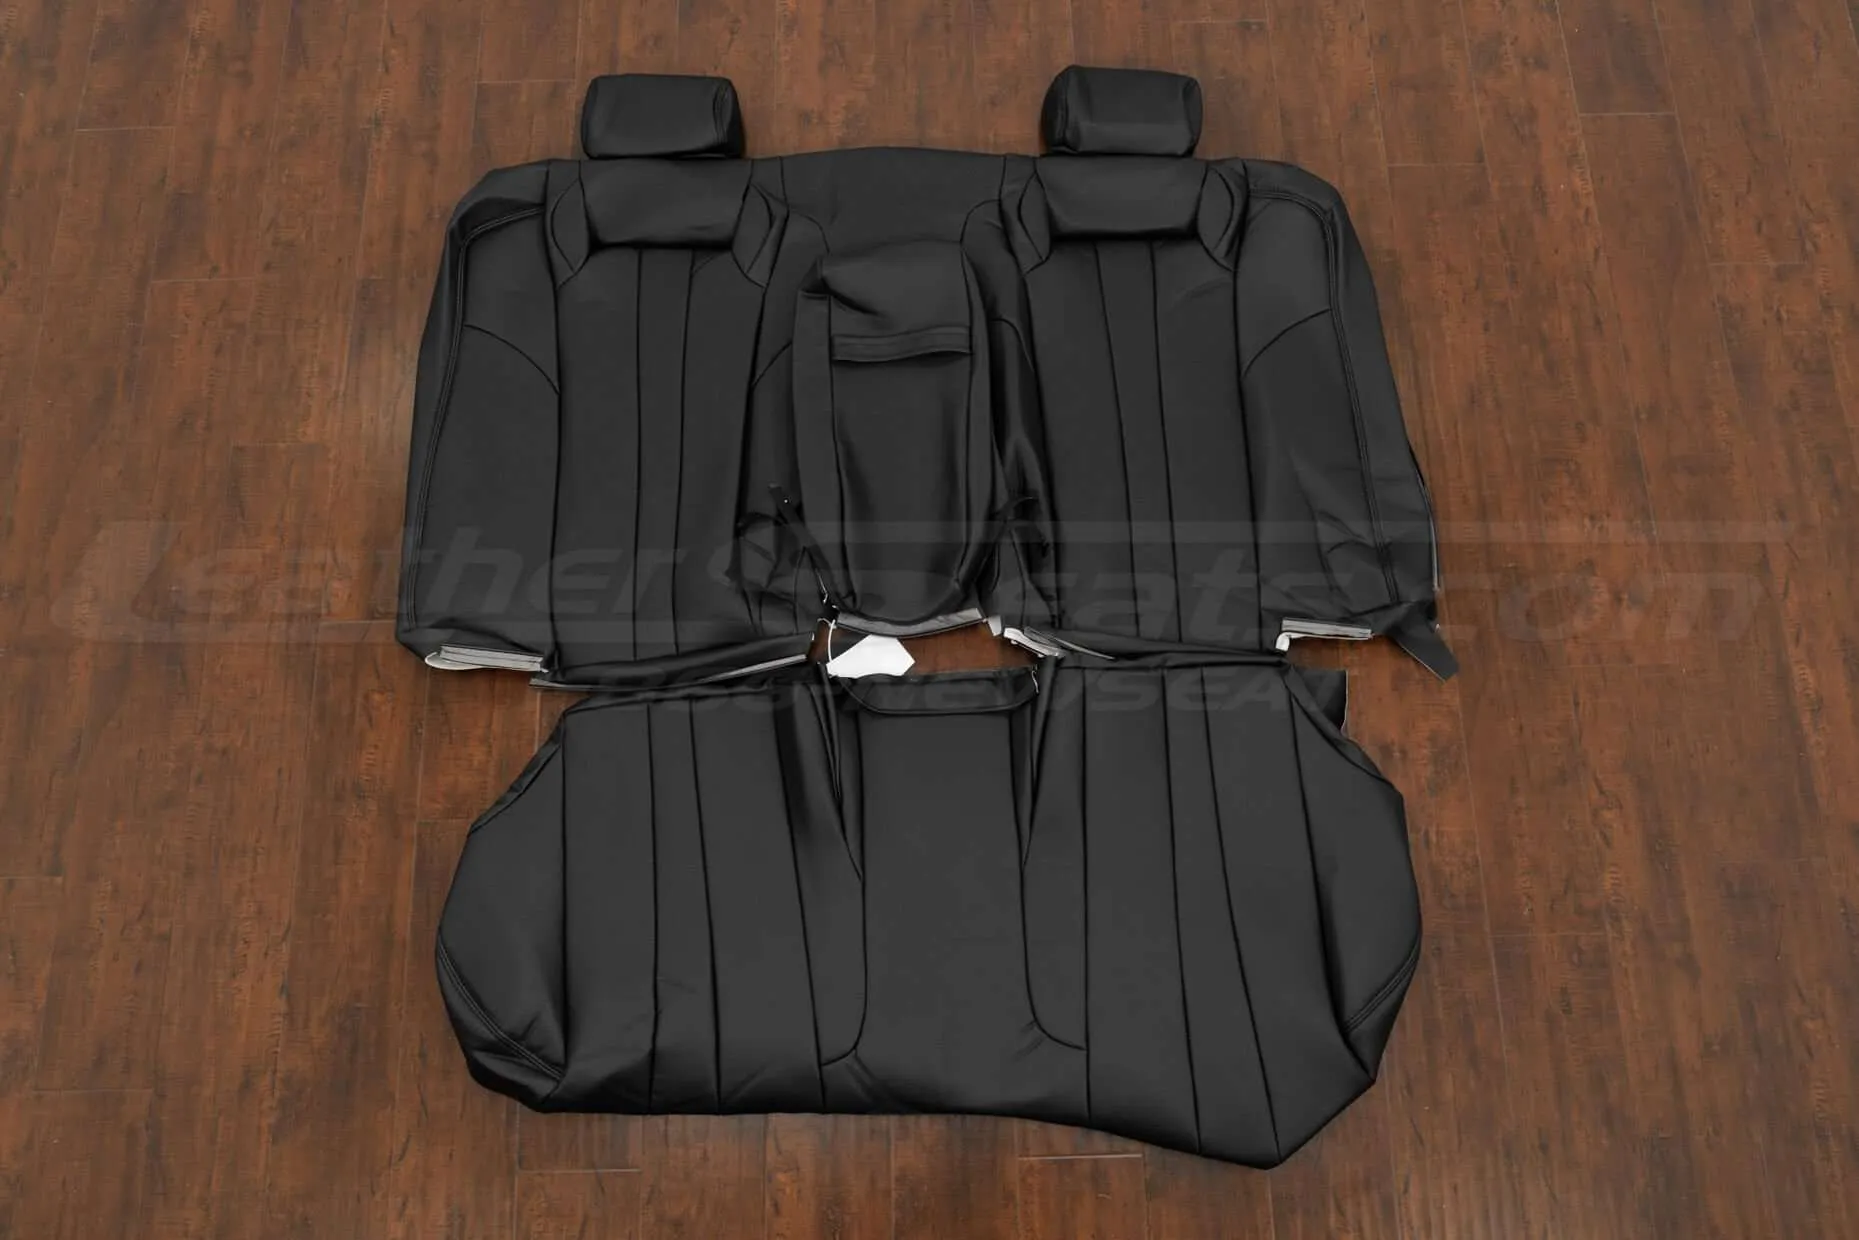 Lexus GS300 Leather Seat Kit - Black - rear seat upholstery with armrest